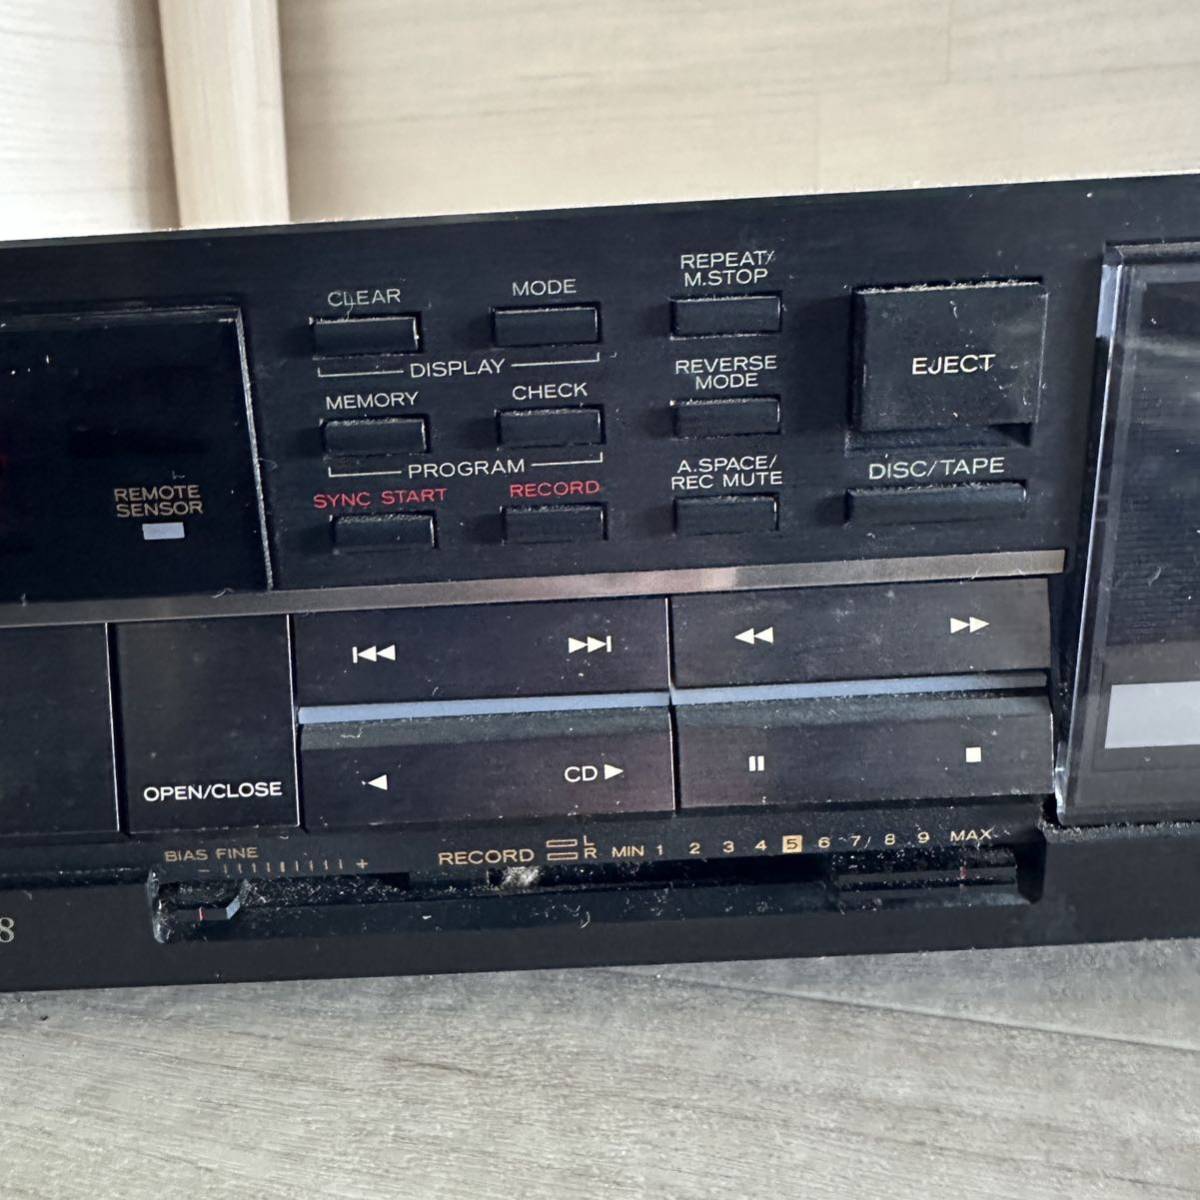  【A0250】TEAC CDプレーヤー/カセットデッキ CD Player/Reverse Cassette Deck AD-8◎通電確認済み・動作未確認・ジャンク品扱い◎_画像5